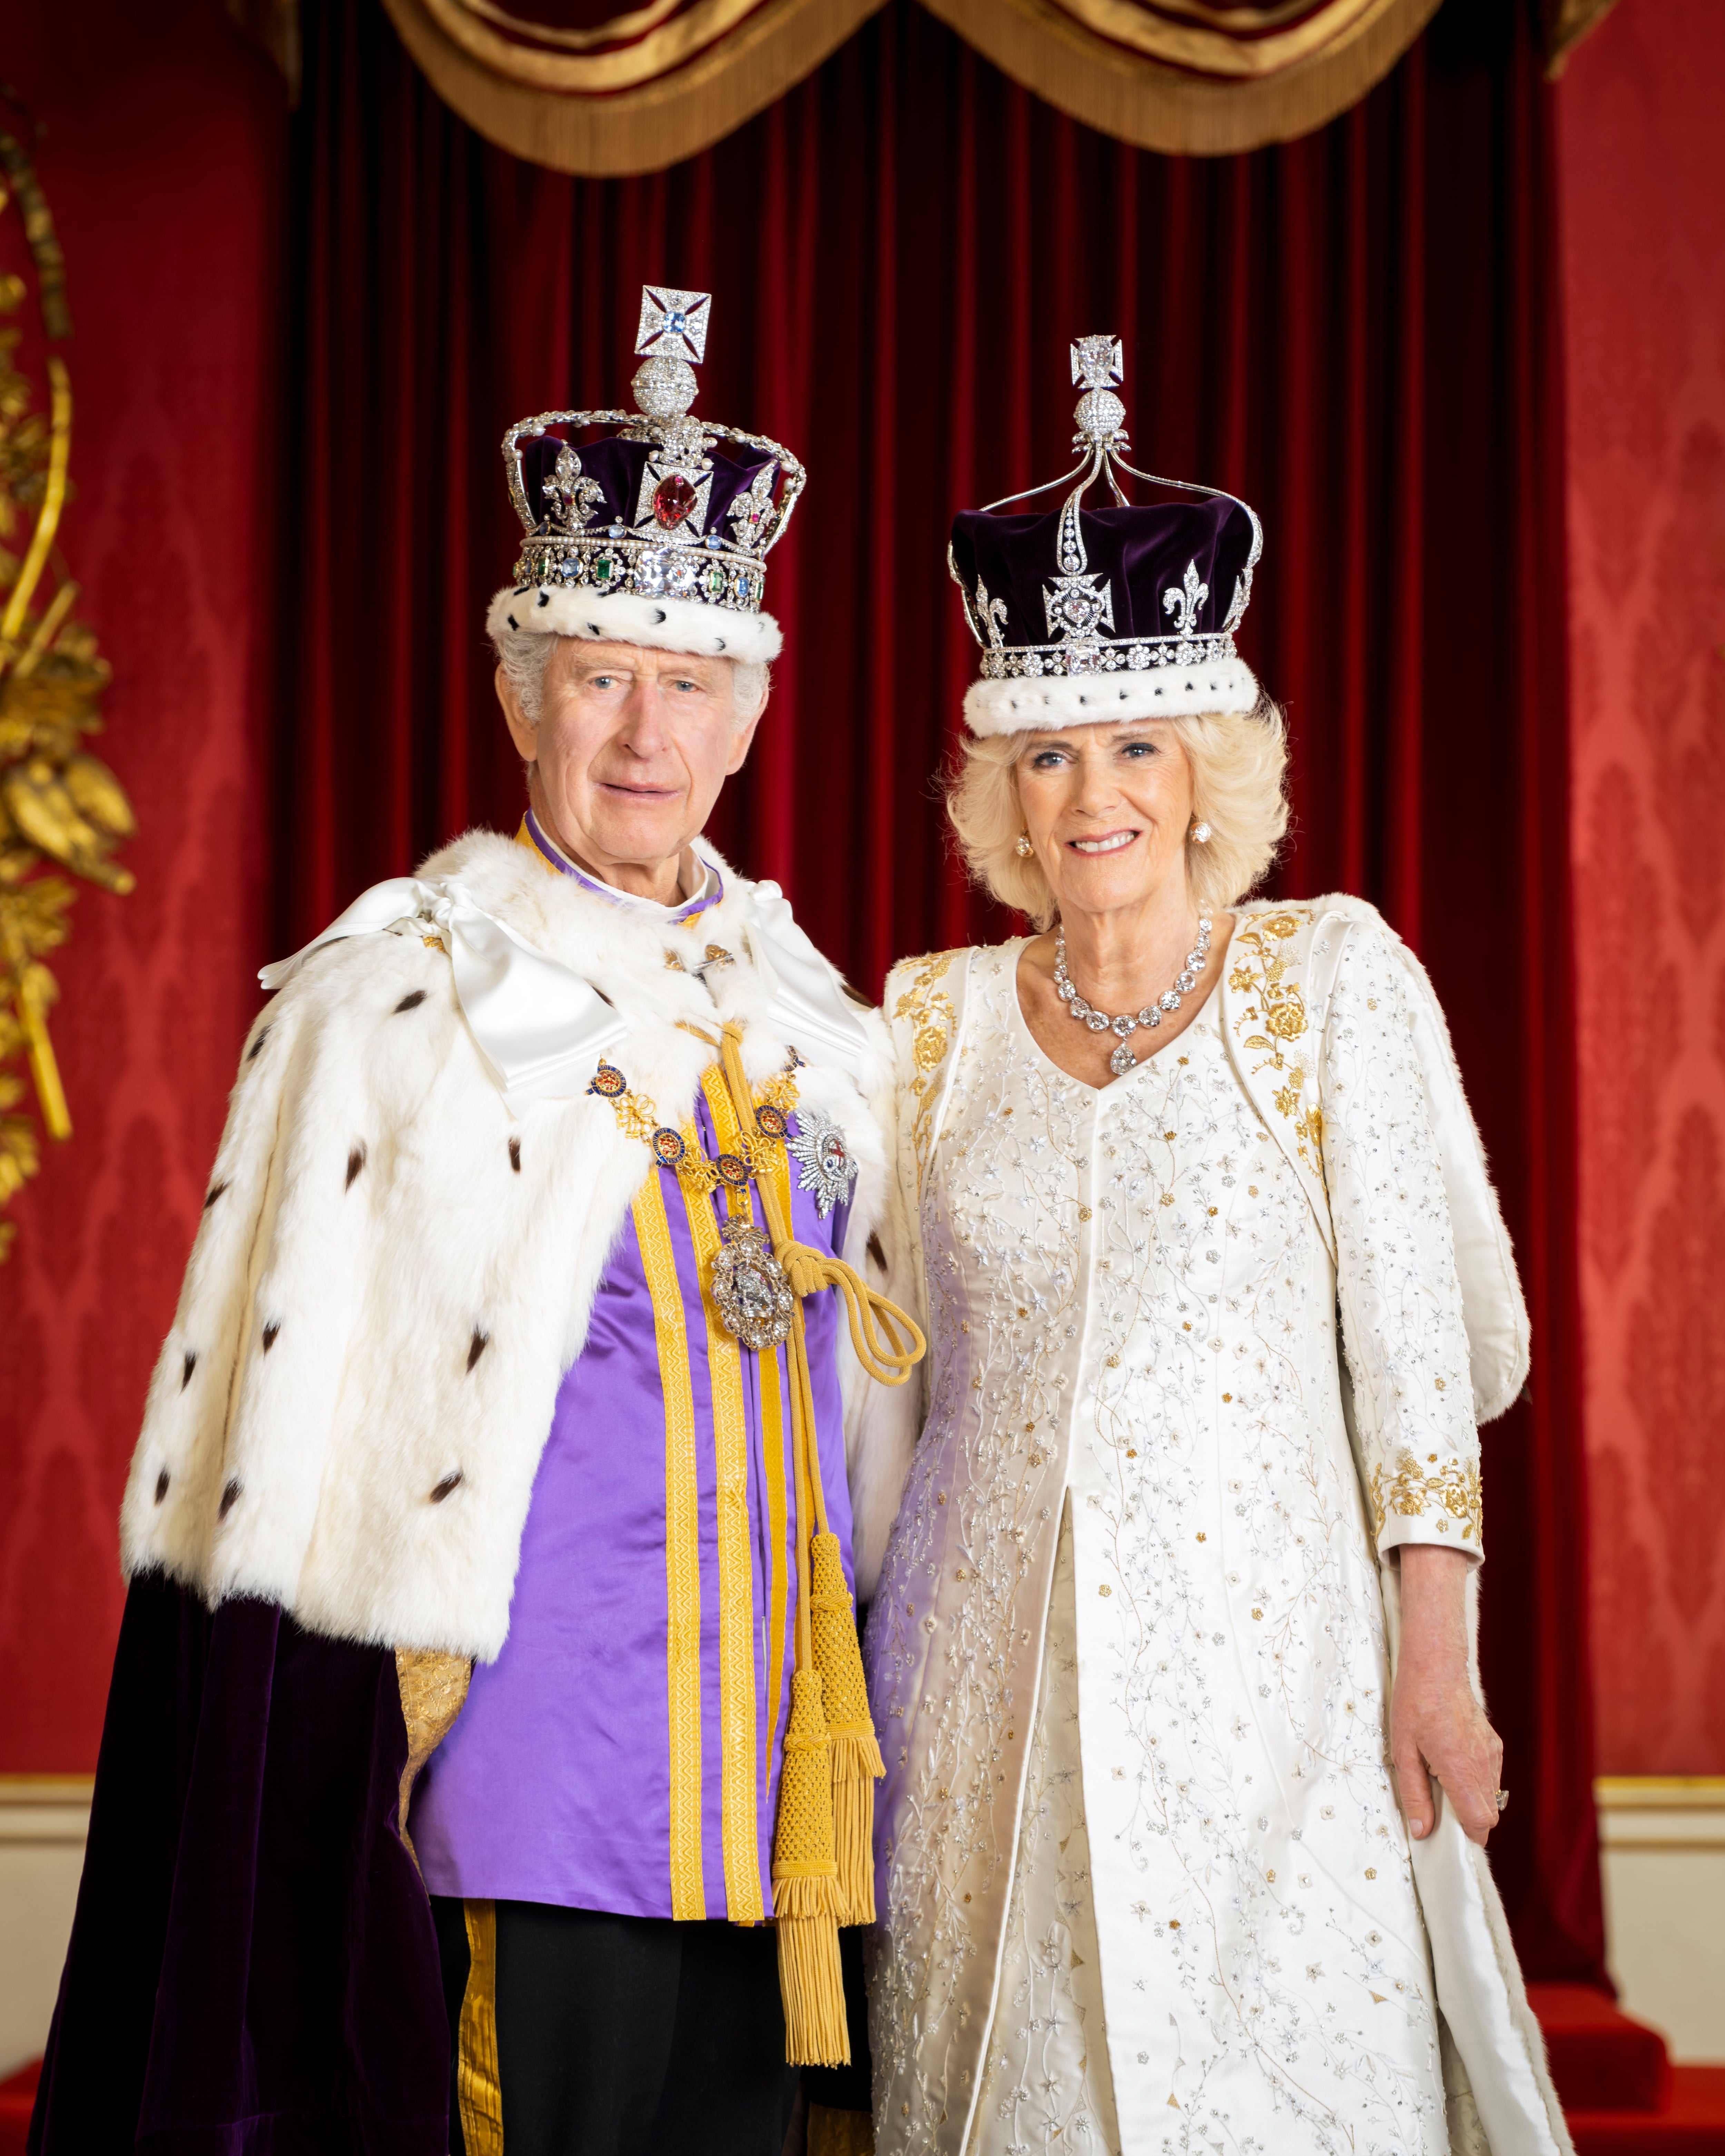 King and queen share 'heartfelt thanks' as official coronation